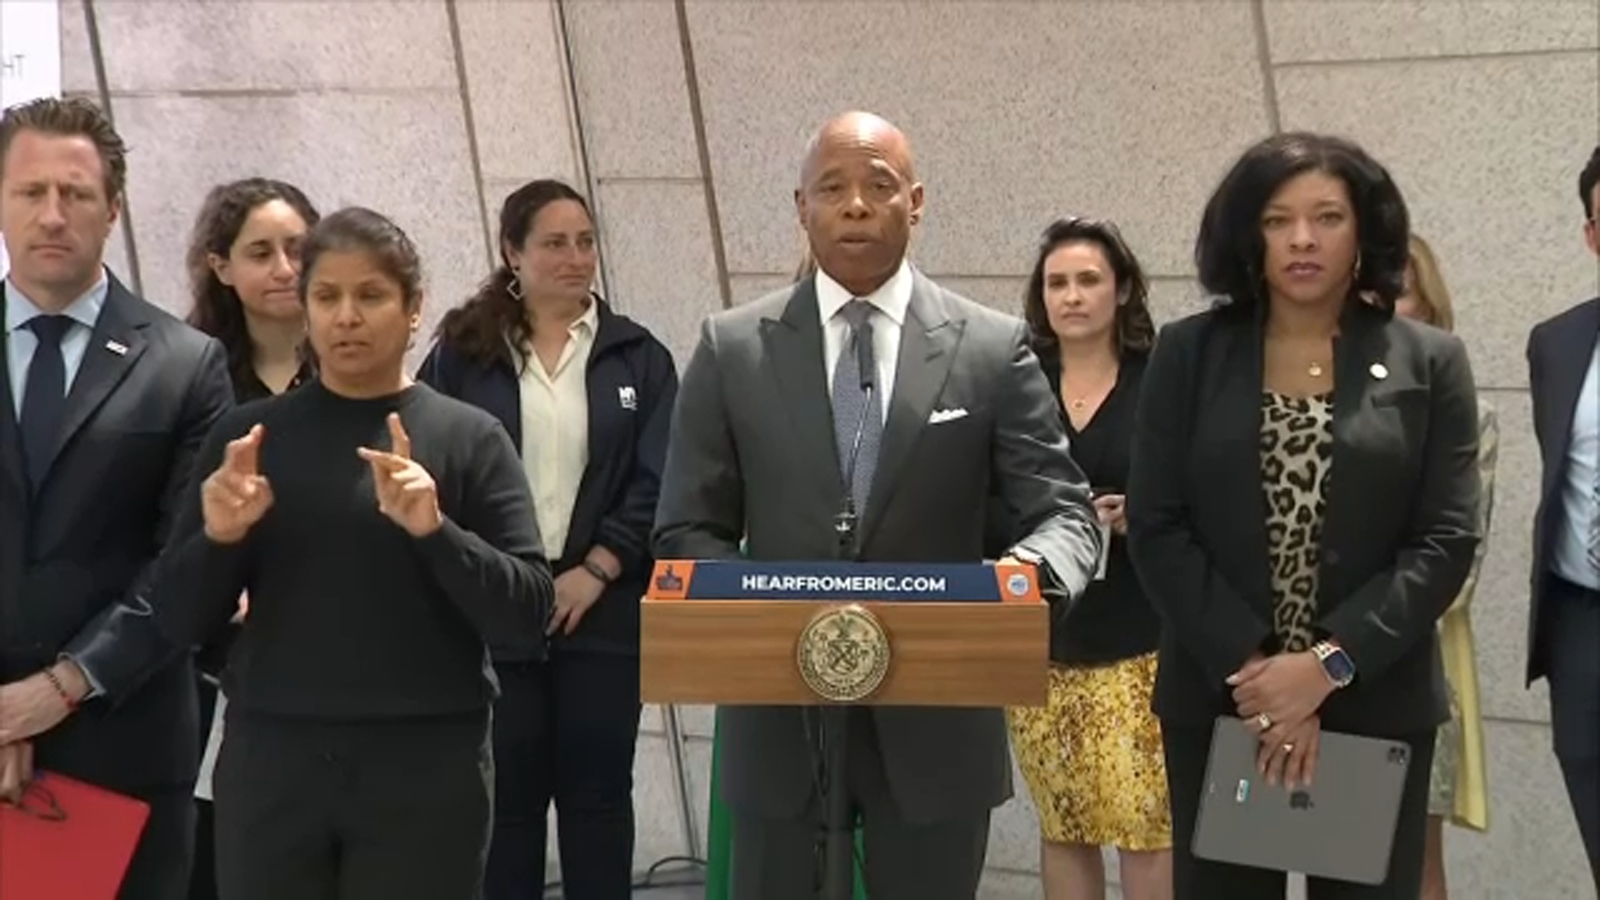 NYC Weather: Mayor Eric Adams announces new measures regarding preparedness during extreme weather in New York City [Video]